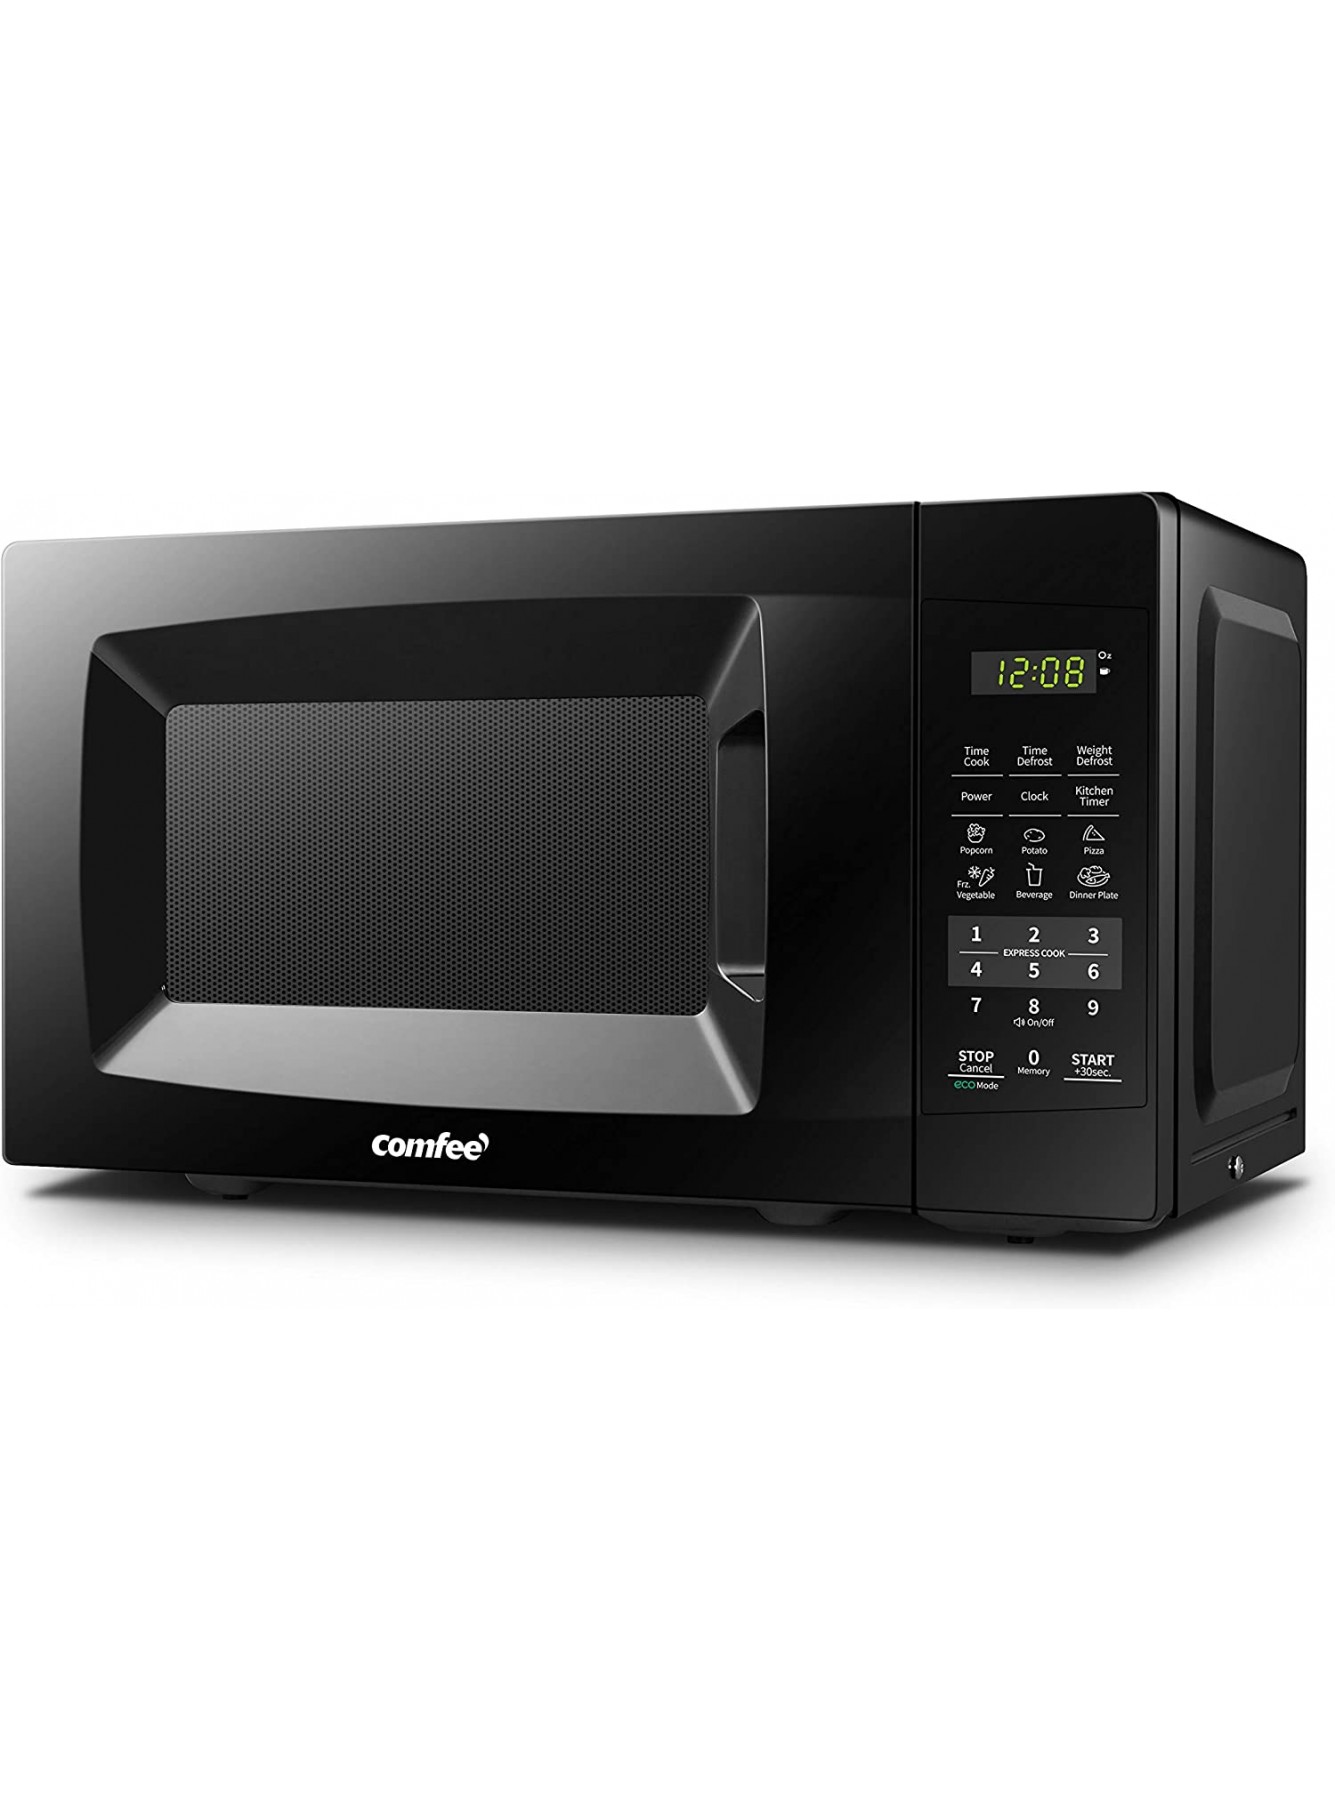 COMFEE' EM720CPL-PMB Countertop Microwave Oven with Sound On Off ECO Mode and Easy One-Touch Buttons 0.7cu.ft 700W Black B07GV36BLD